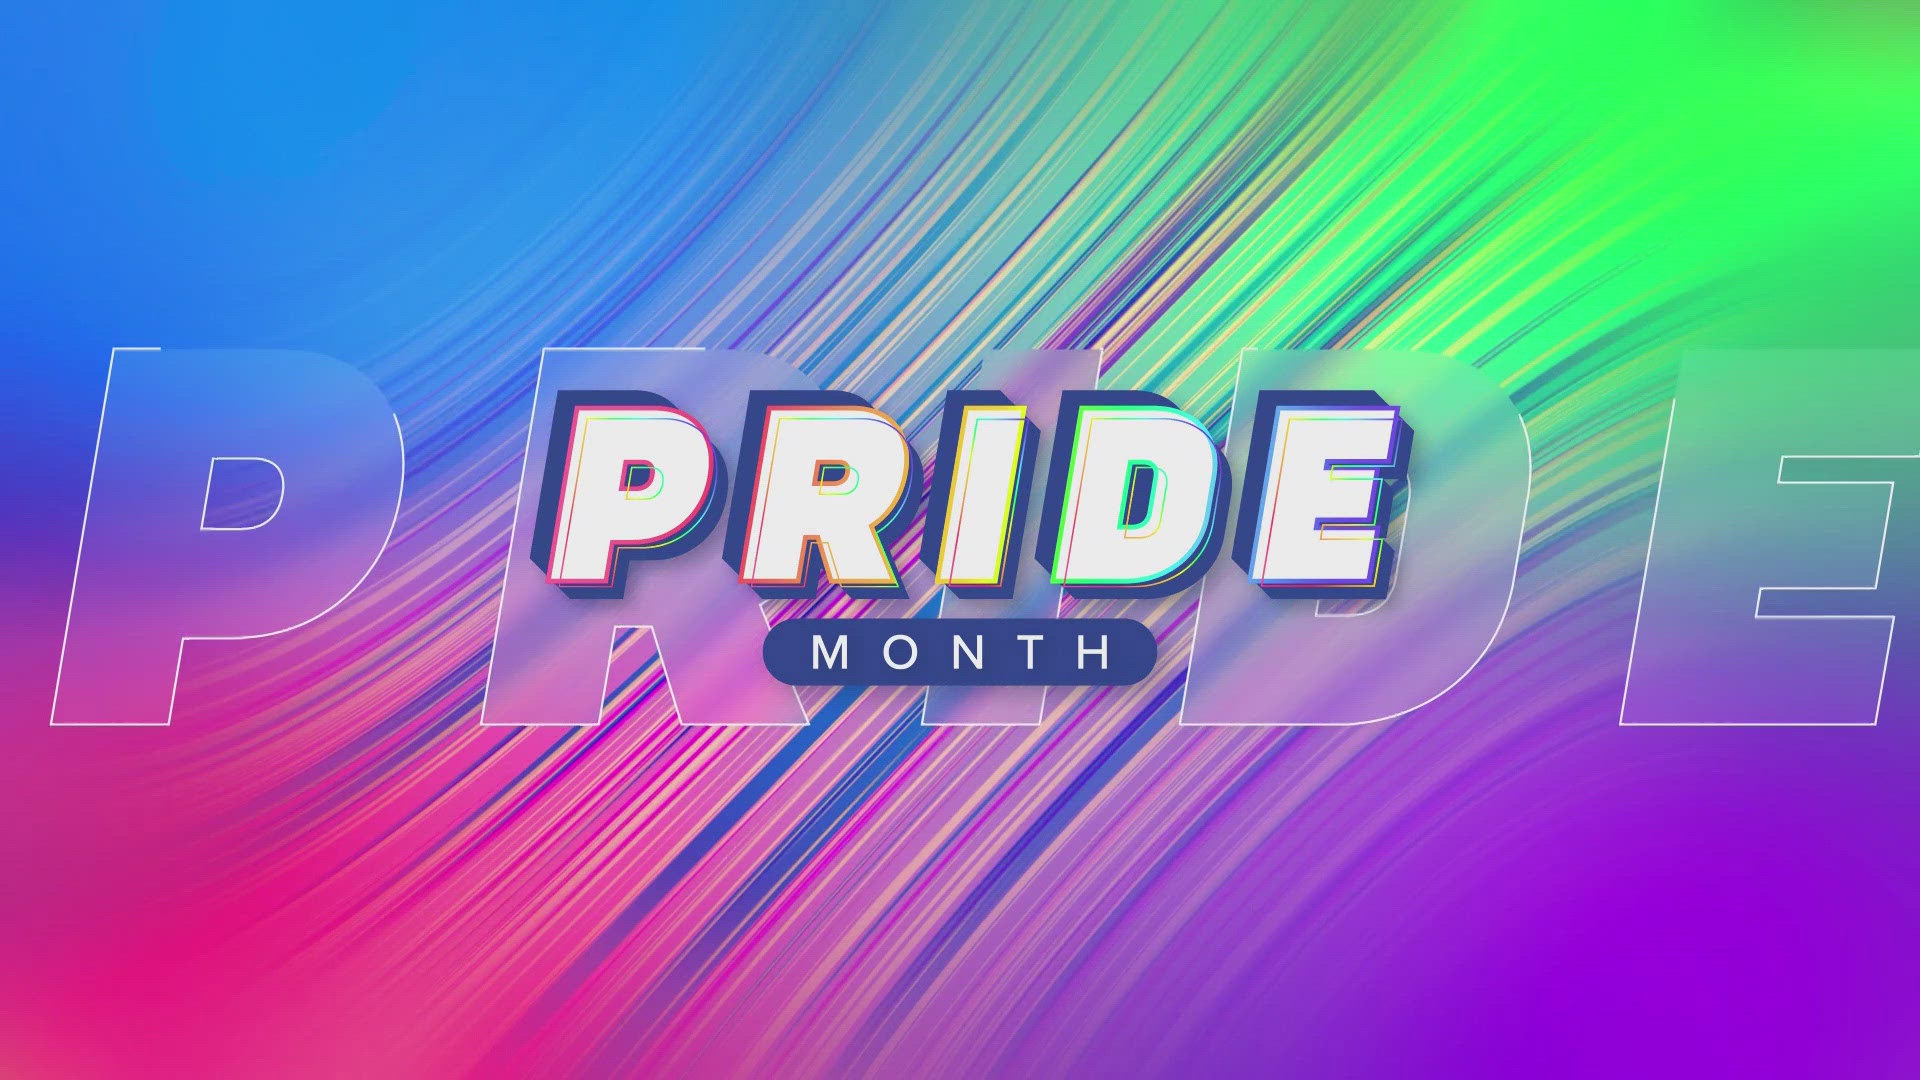 The big PrideFest celebration is returning to downtown St. Louis. PrideSTL announced this year's theme as "Unleash Your Pride."